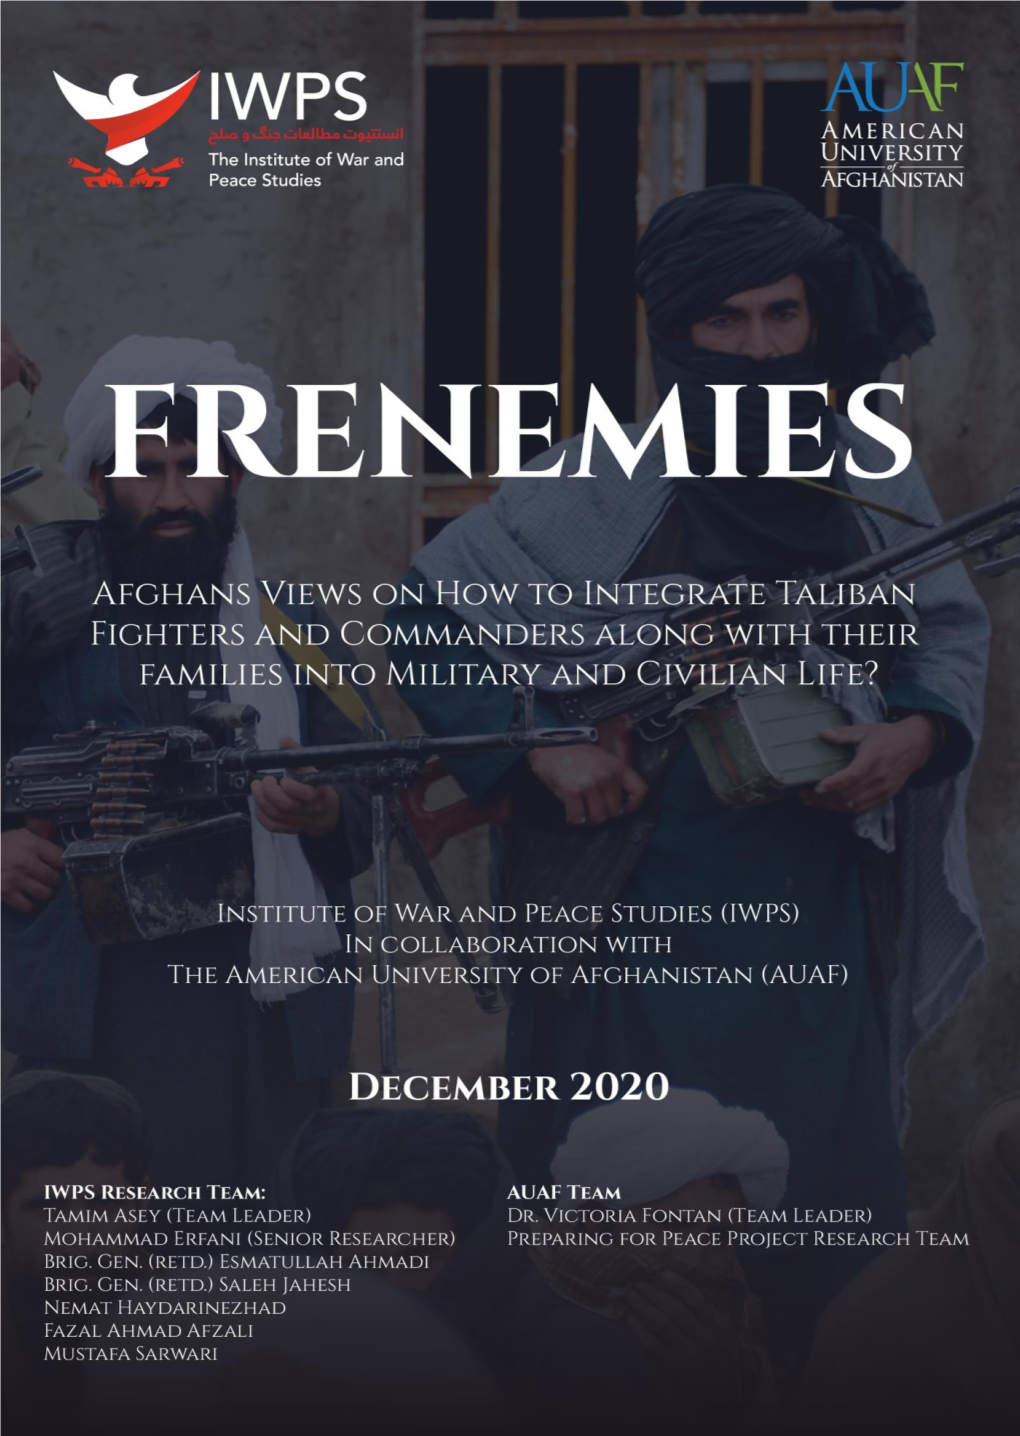 How to Integrate Taliban & Their Families Into Military & Civilian Life